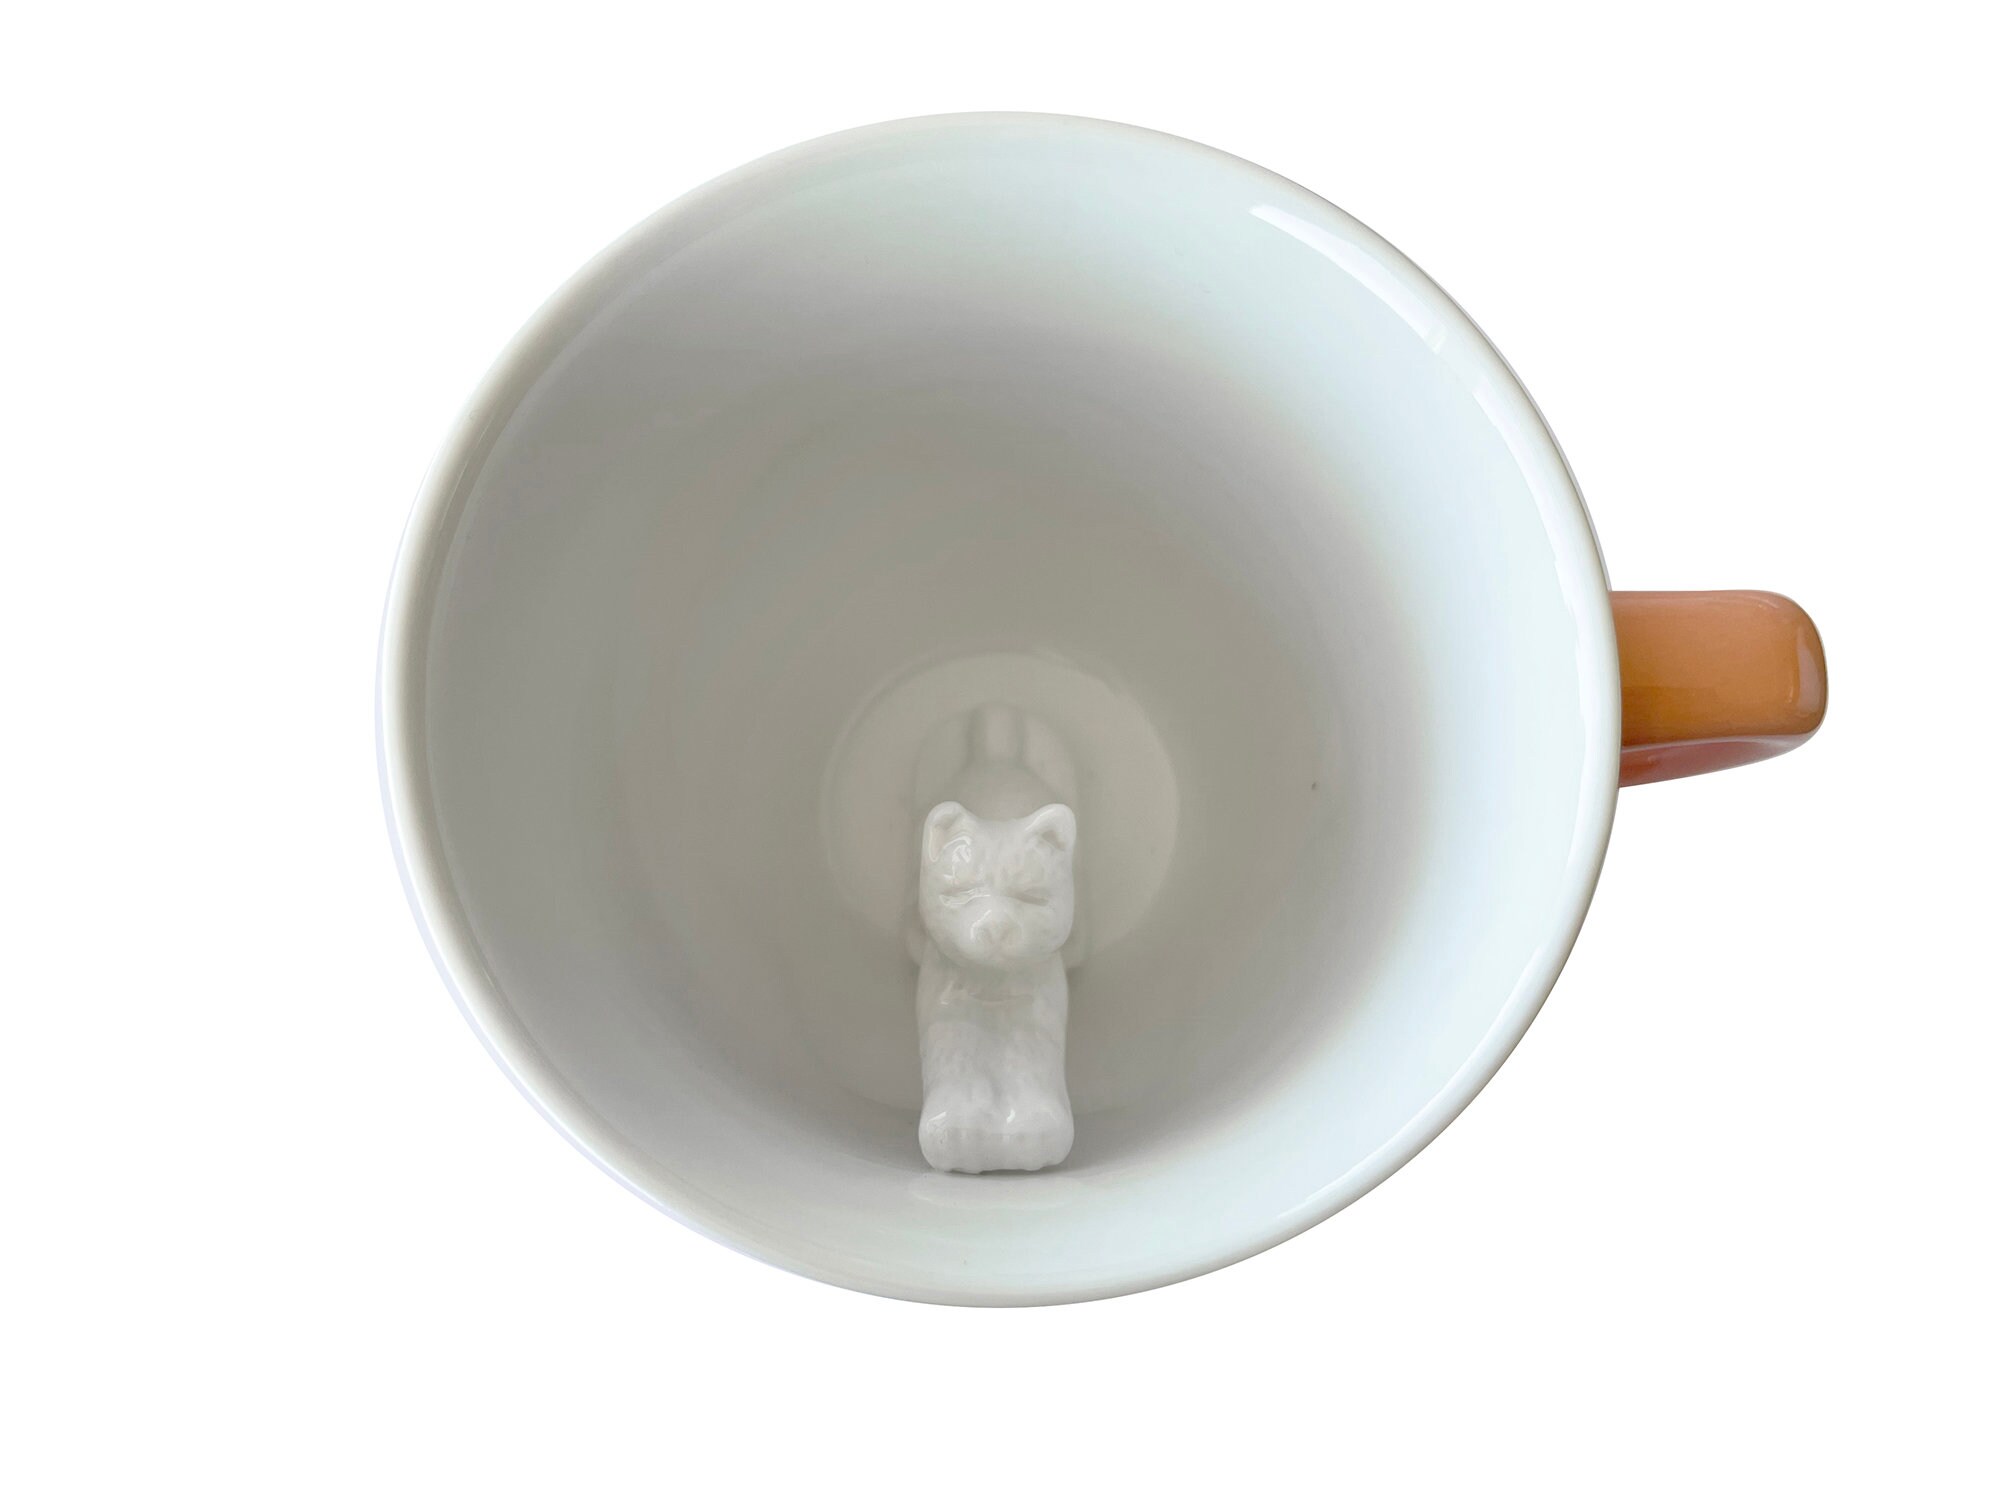  creature cups Cat Stretch Ceramic Cup (11 Ounce, Dark Grey) -  Hidden Animal Inside - Stretching Kitty Cat Mug - Birthday and Housewarming  Gift for Coffee & Tea Lovers : Home & Kitchen